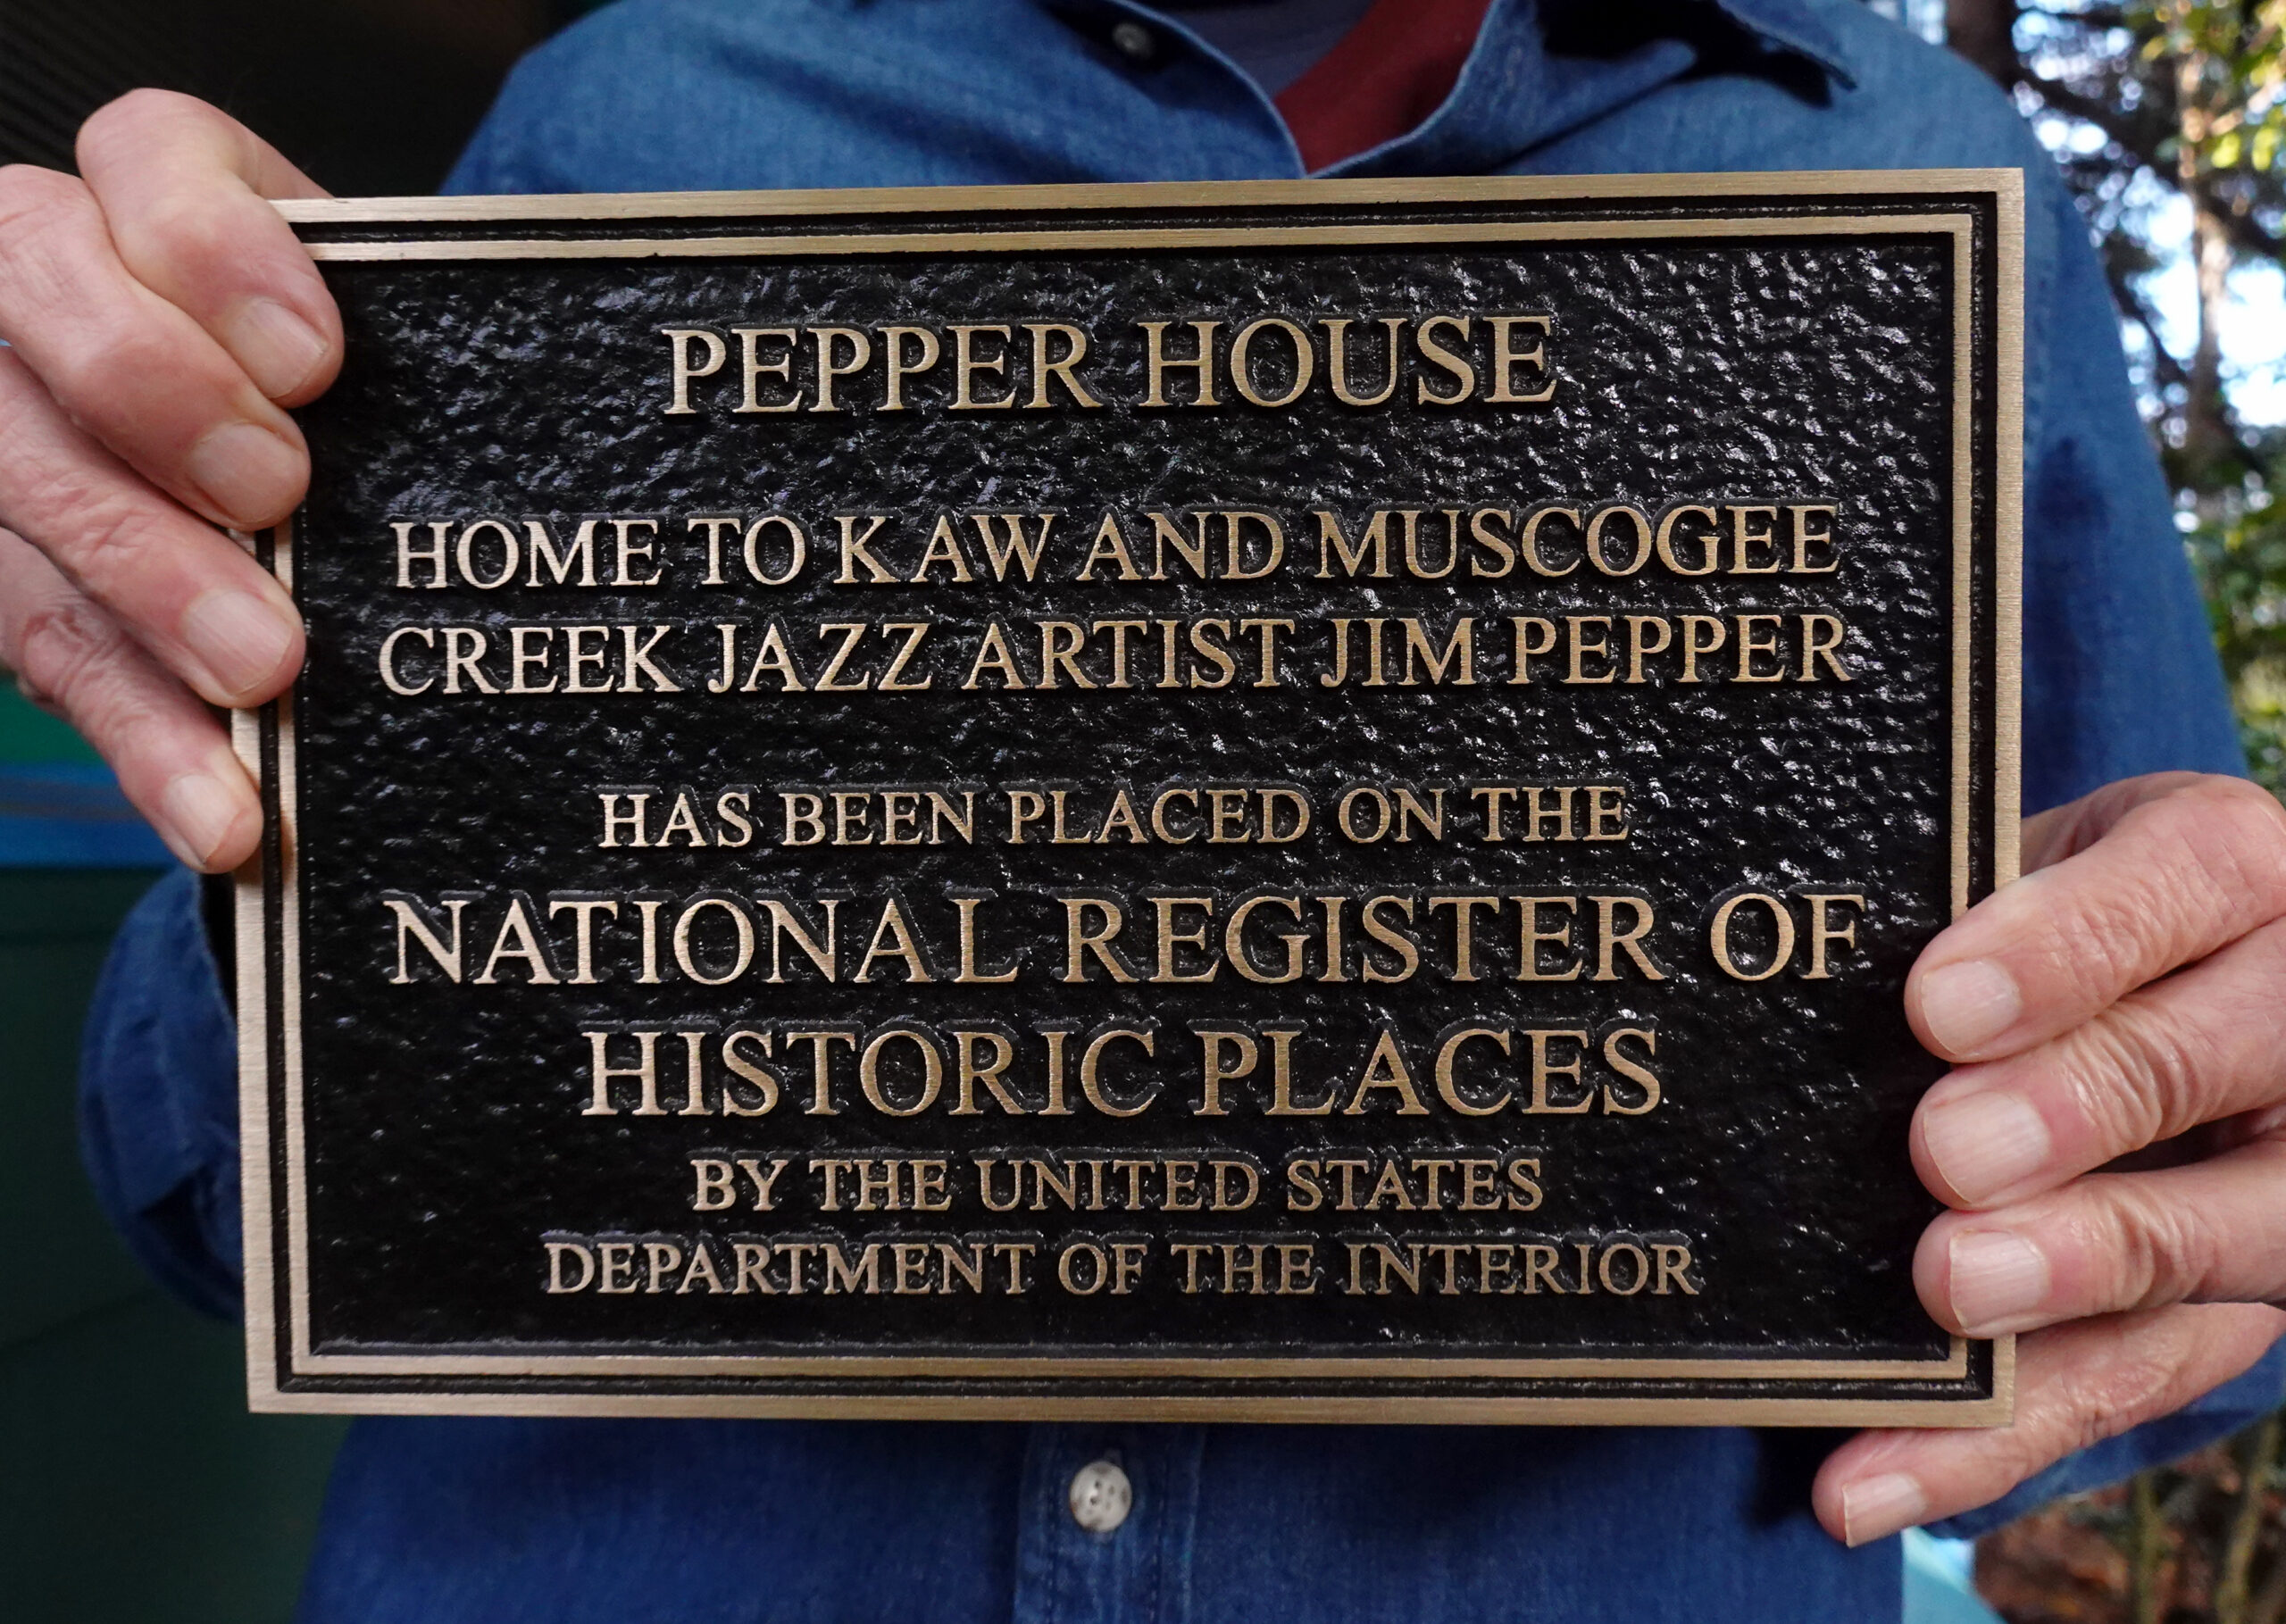 Sean Cruz holds a plaque from the Department of Interior listing the former home of Jim Pepper on the National Register of Historic Places. The plaque reads, “Pepper House. Home to Kaw and Muscogee Creek Jazz Artist Jim Pepper.”